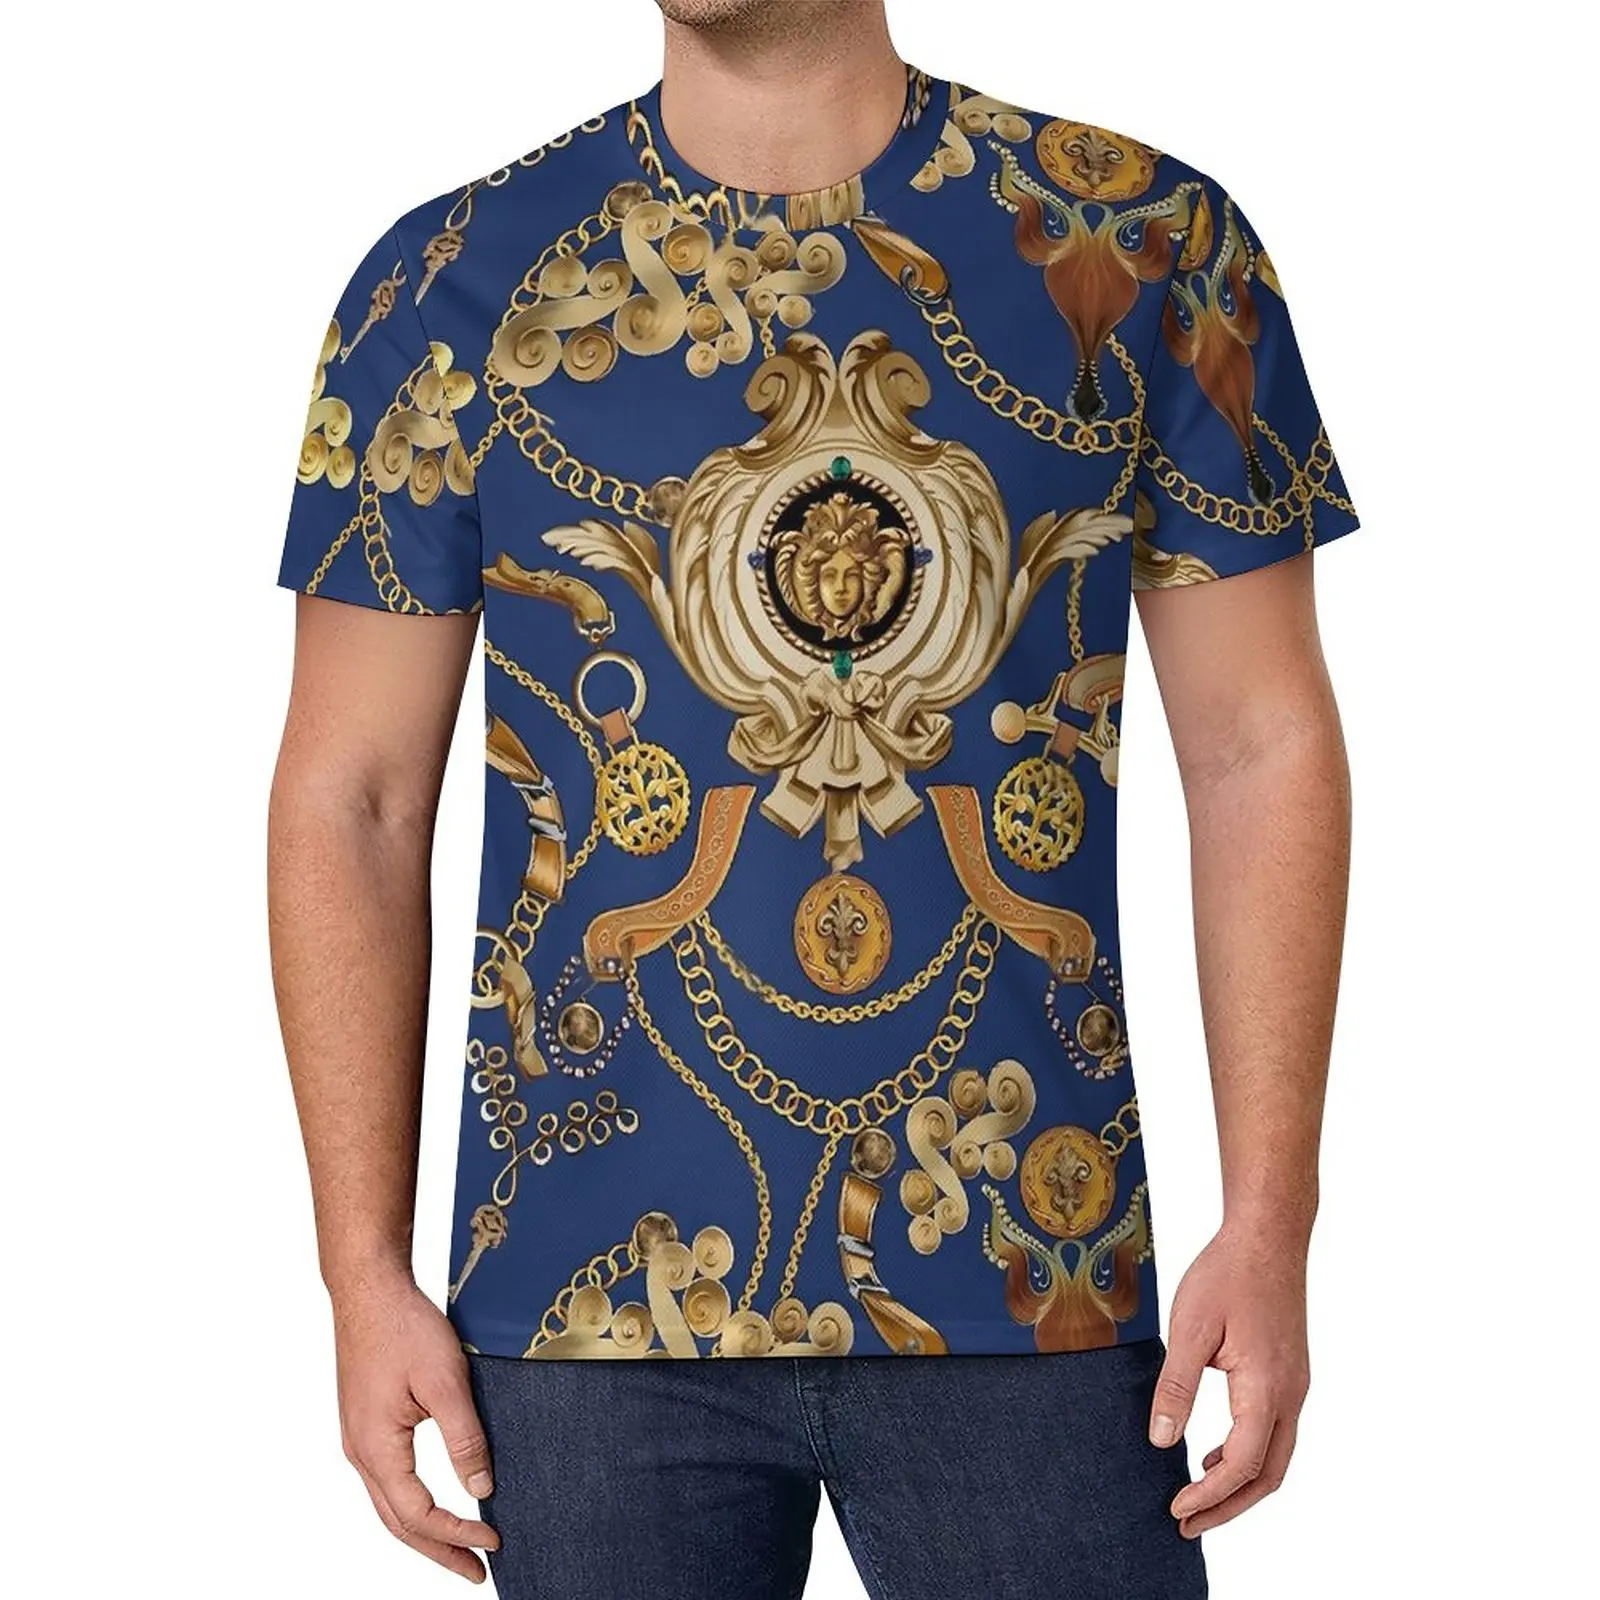 

Golden Chain T-Shirt Retro Baroque Awesome T-Shirts Crew Neck Hip Hop Tshirt Summer Male Pattern Tees Plus Size